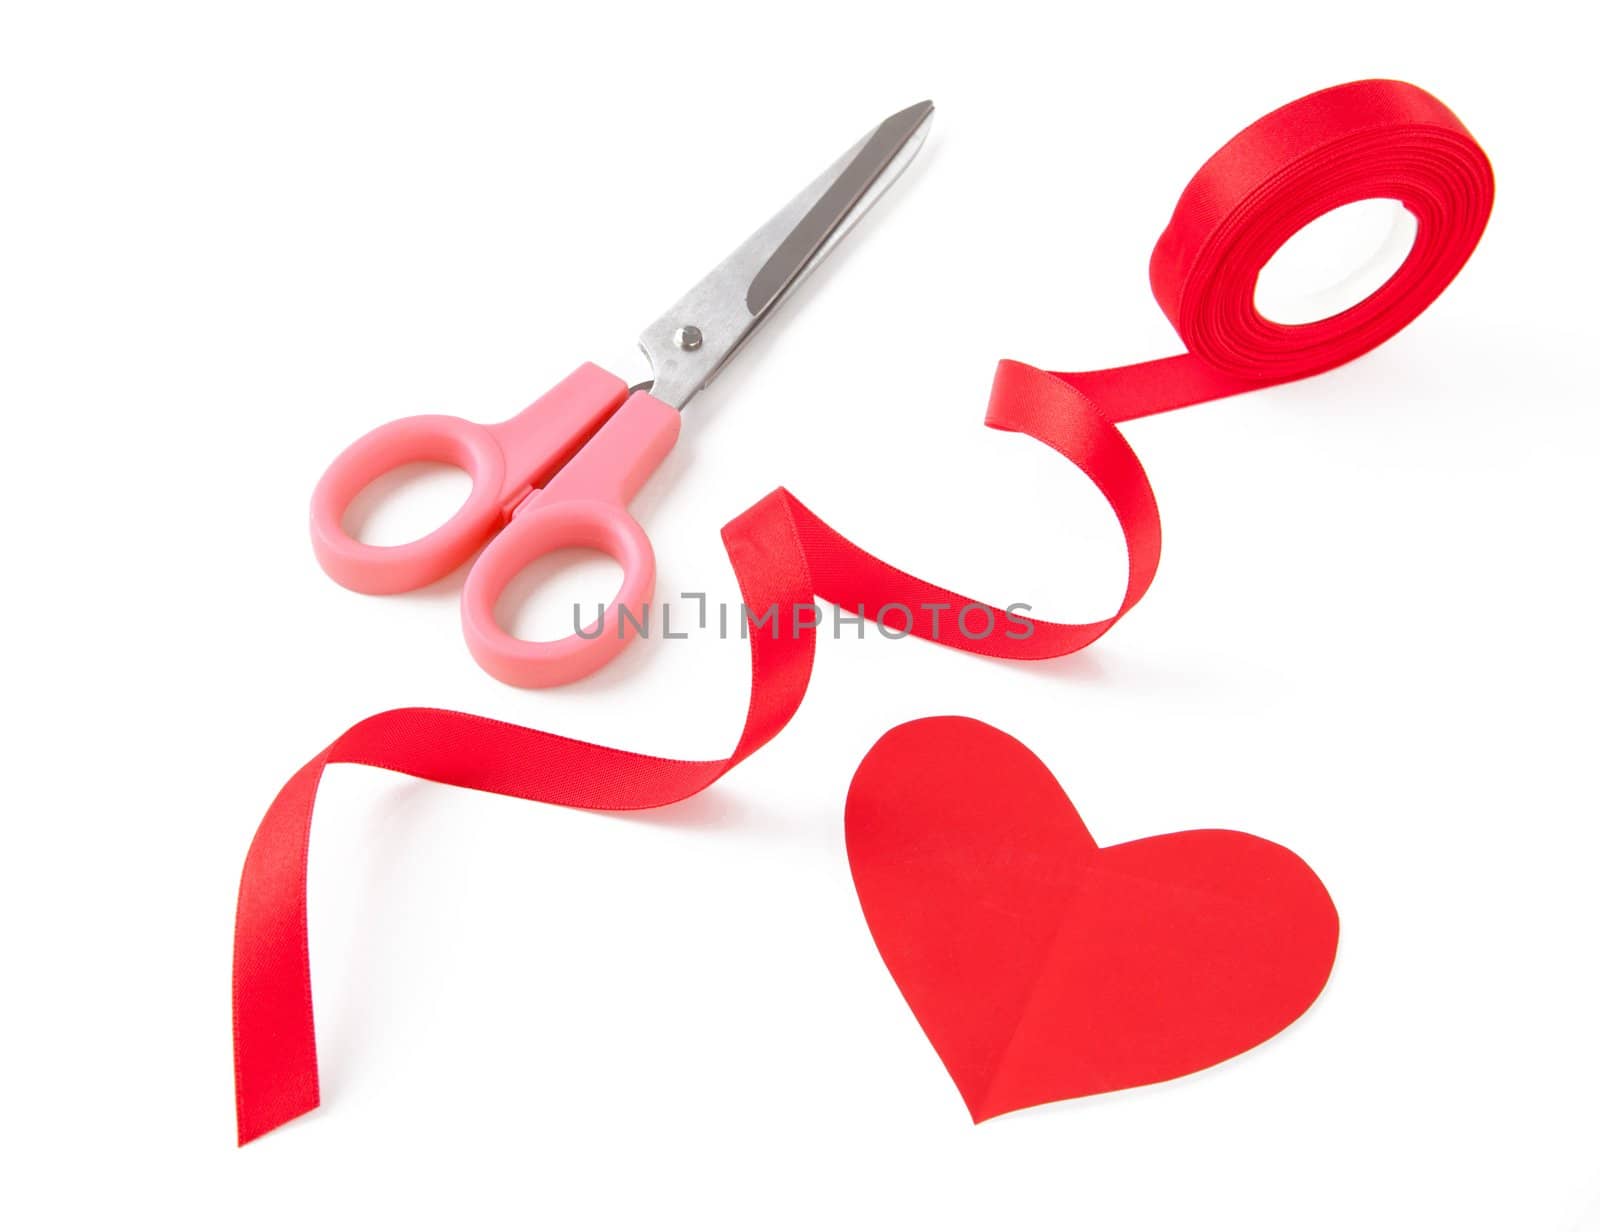 red heart ribbon bow isolated on white background